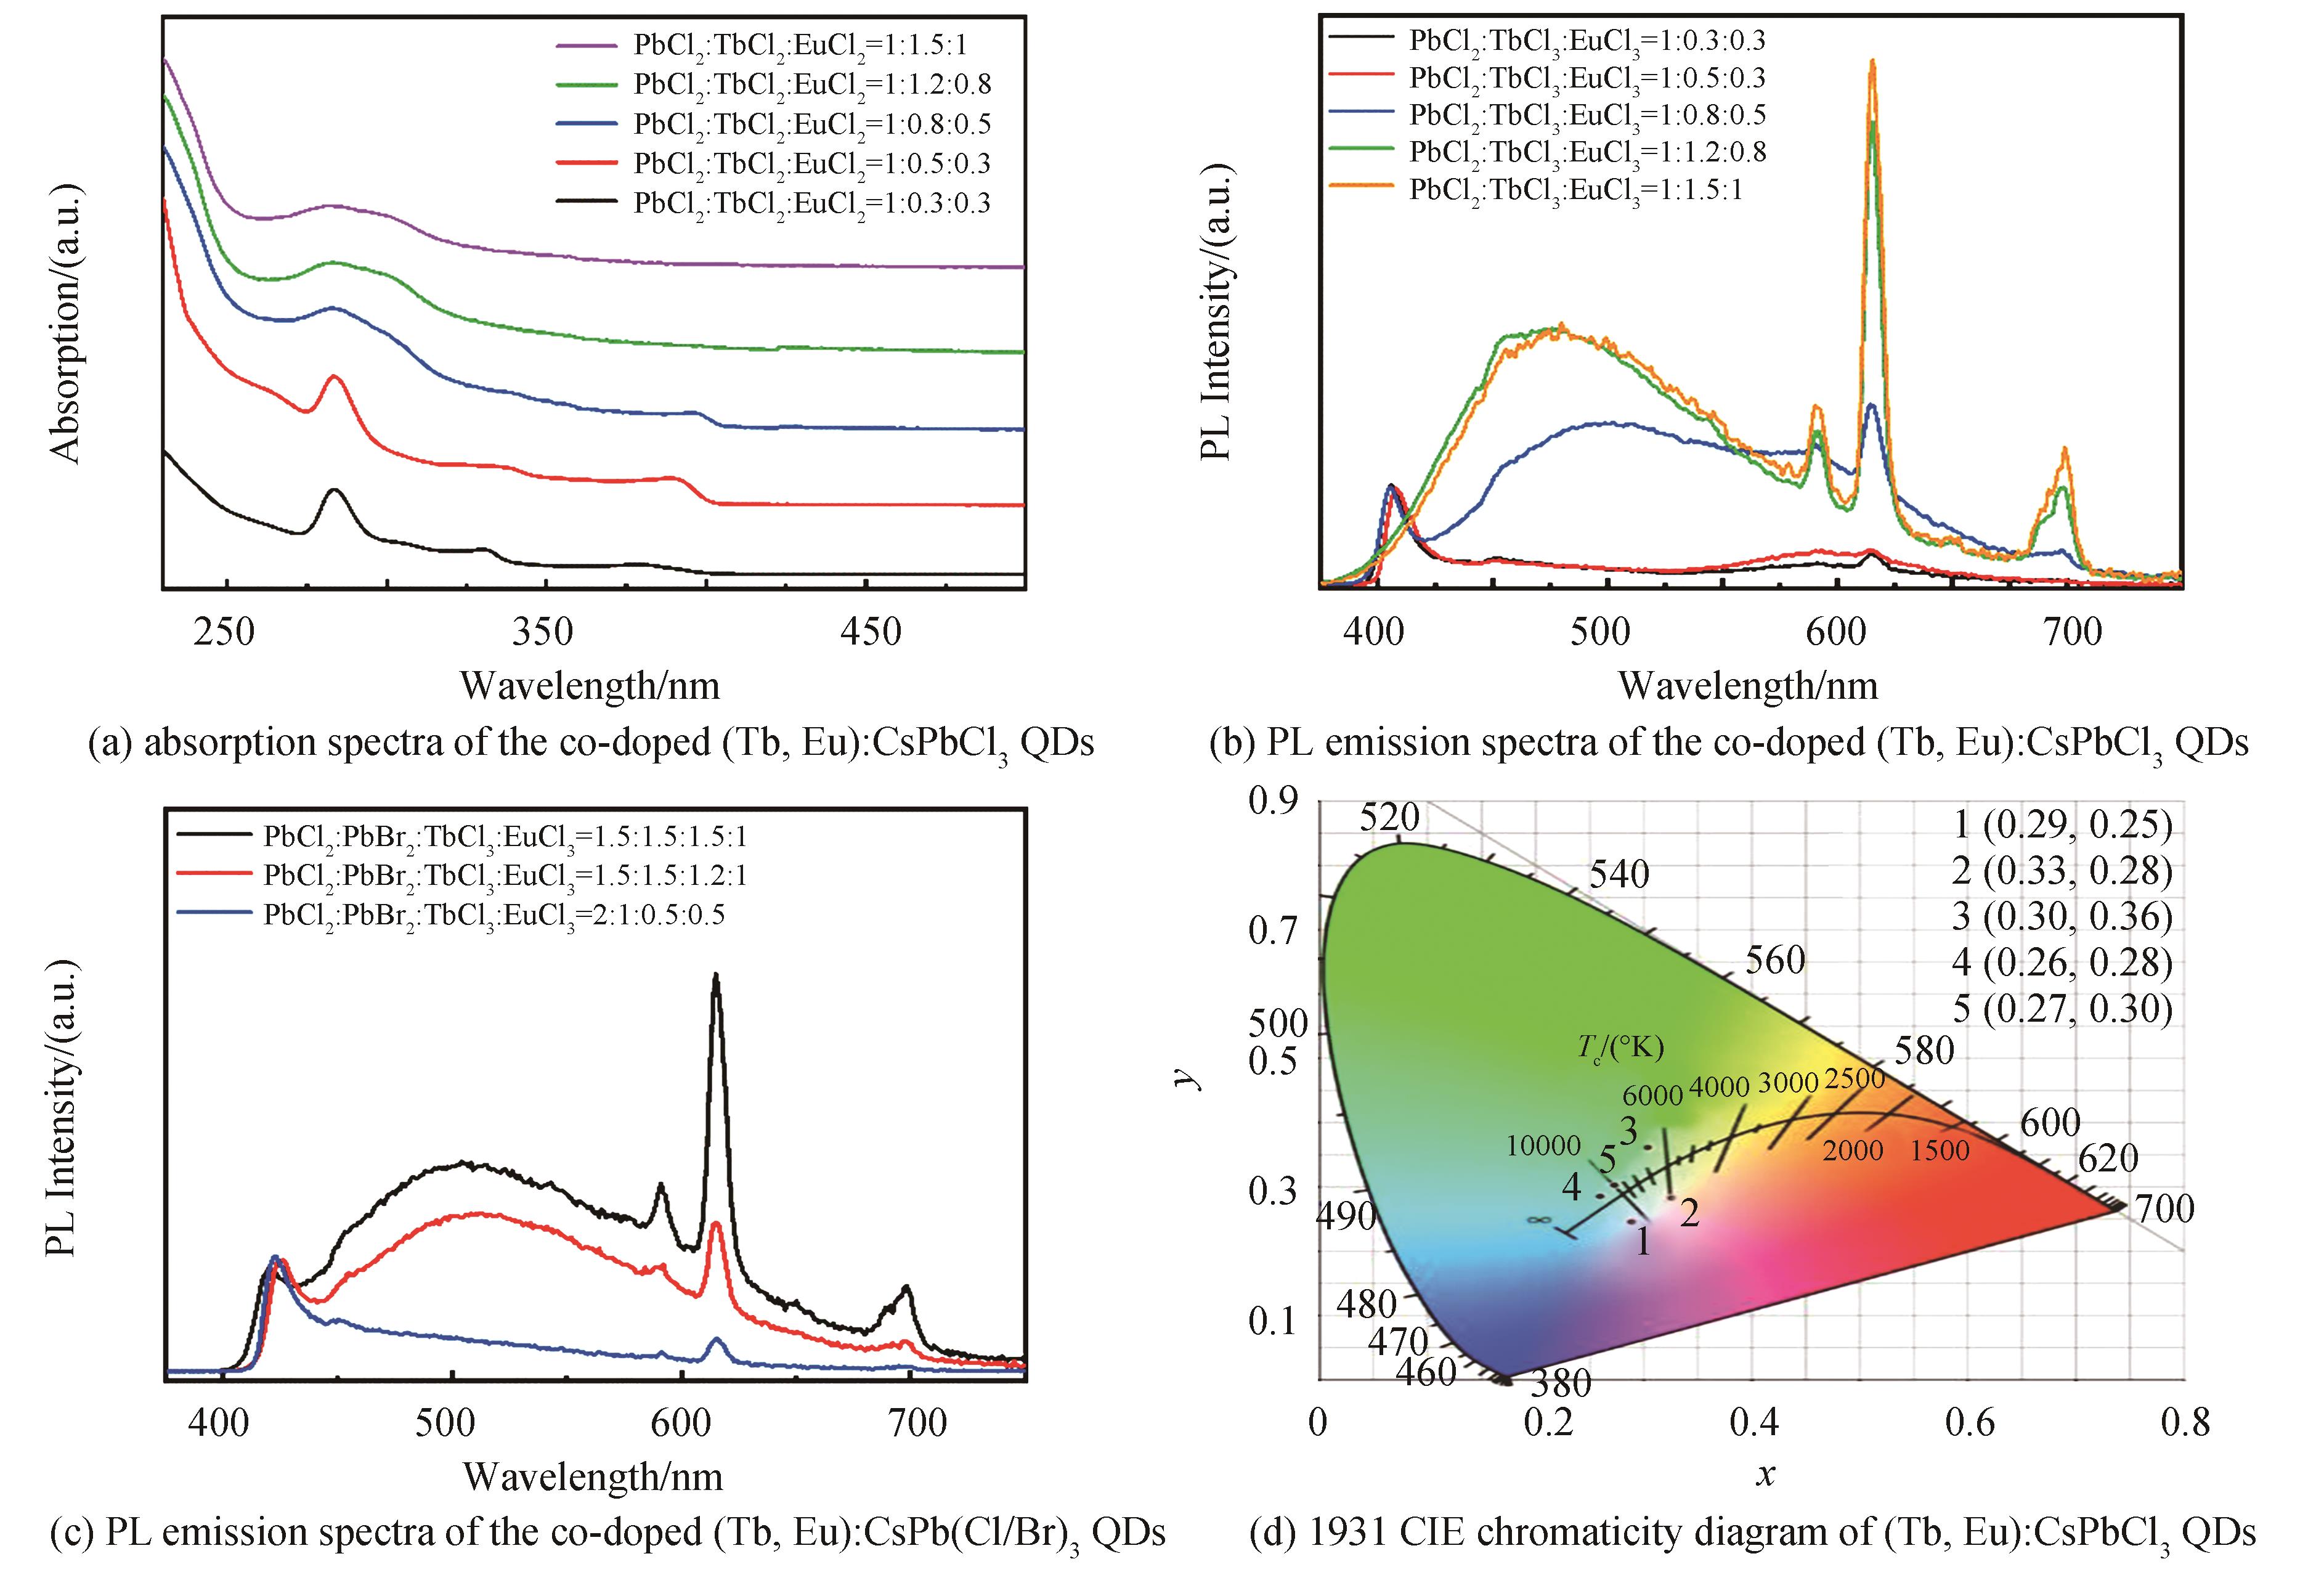 When octane is used as a solvent, the absorption and PL emission spectra and the 1931 CIE chromaticity diagram of the co-doped perovskite quantum dots with various doping concentration